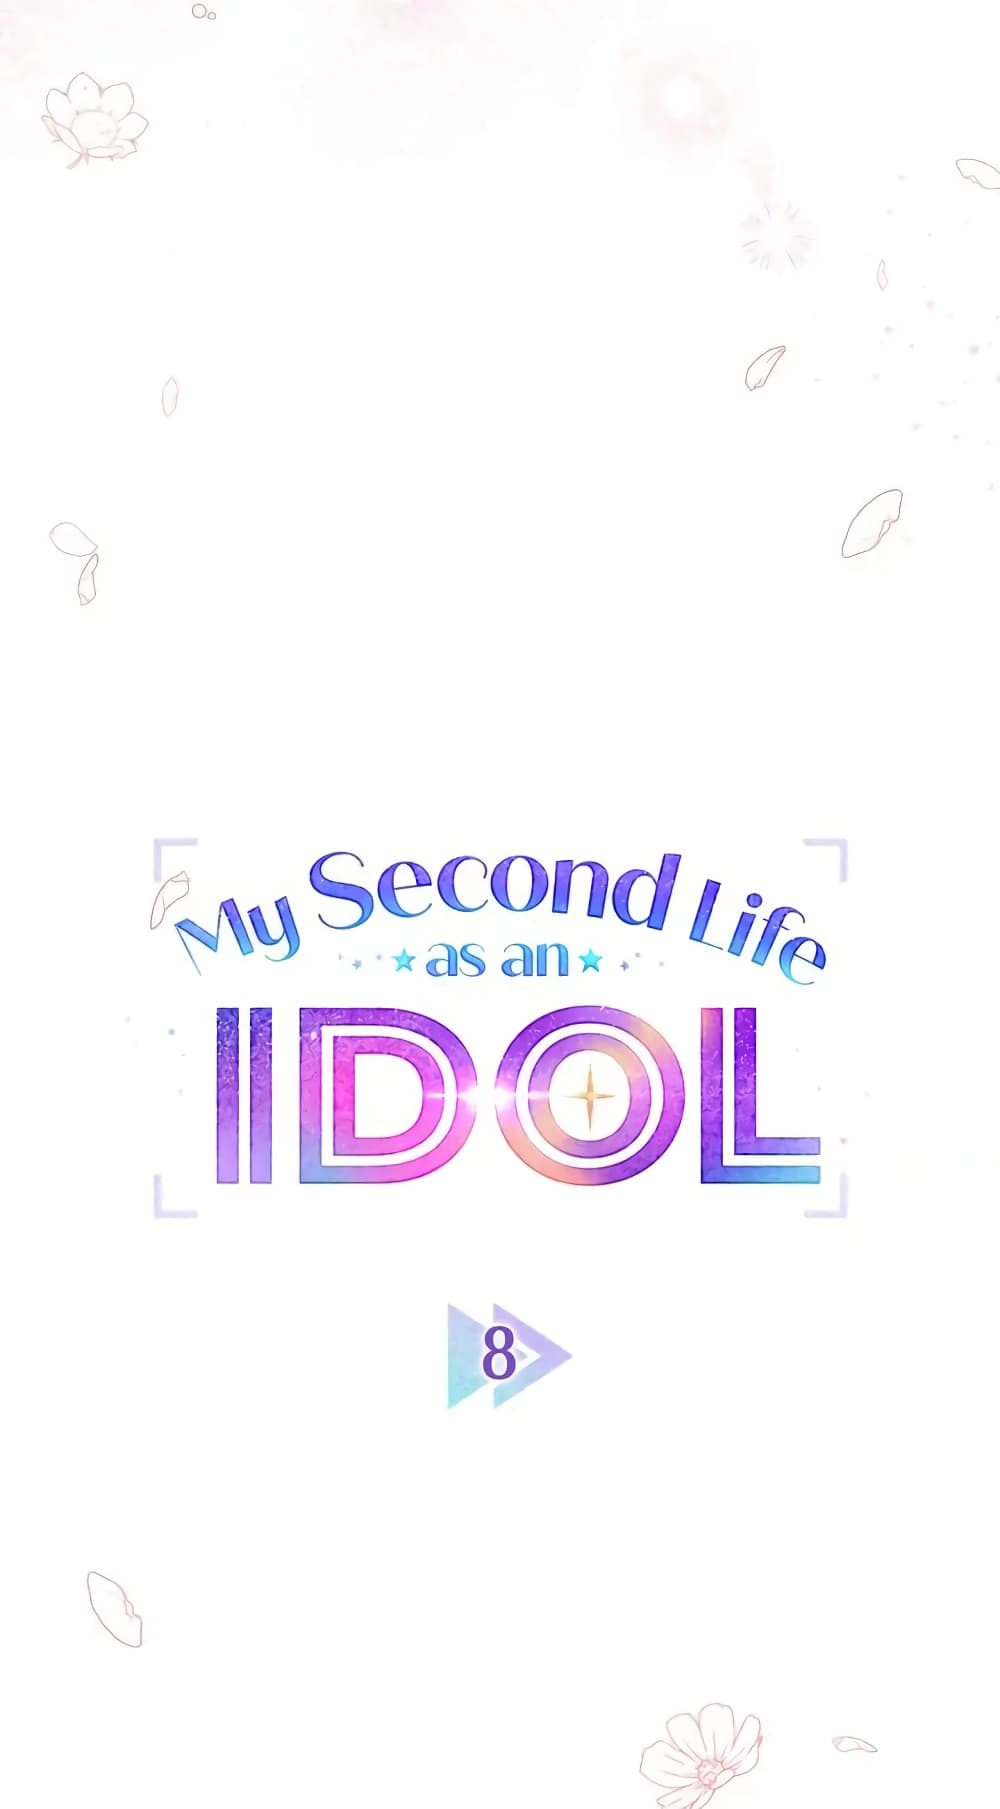 My Second Life as an Idol 8-8